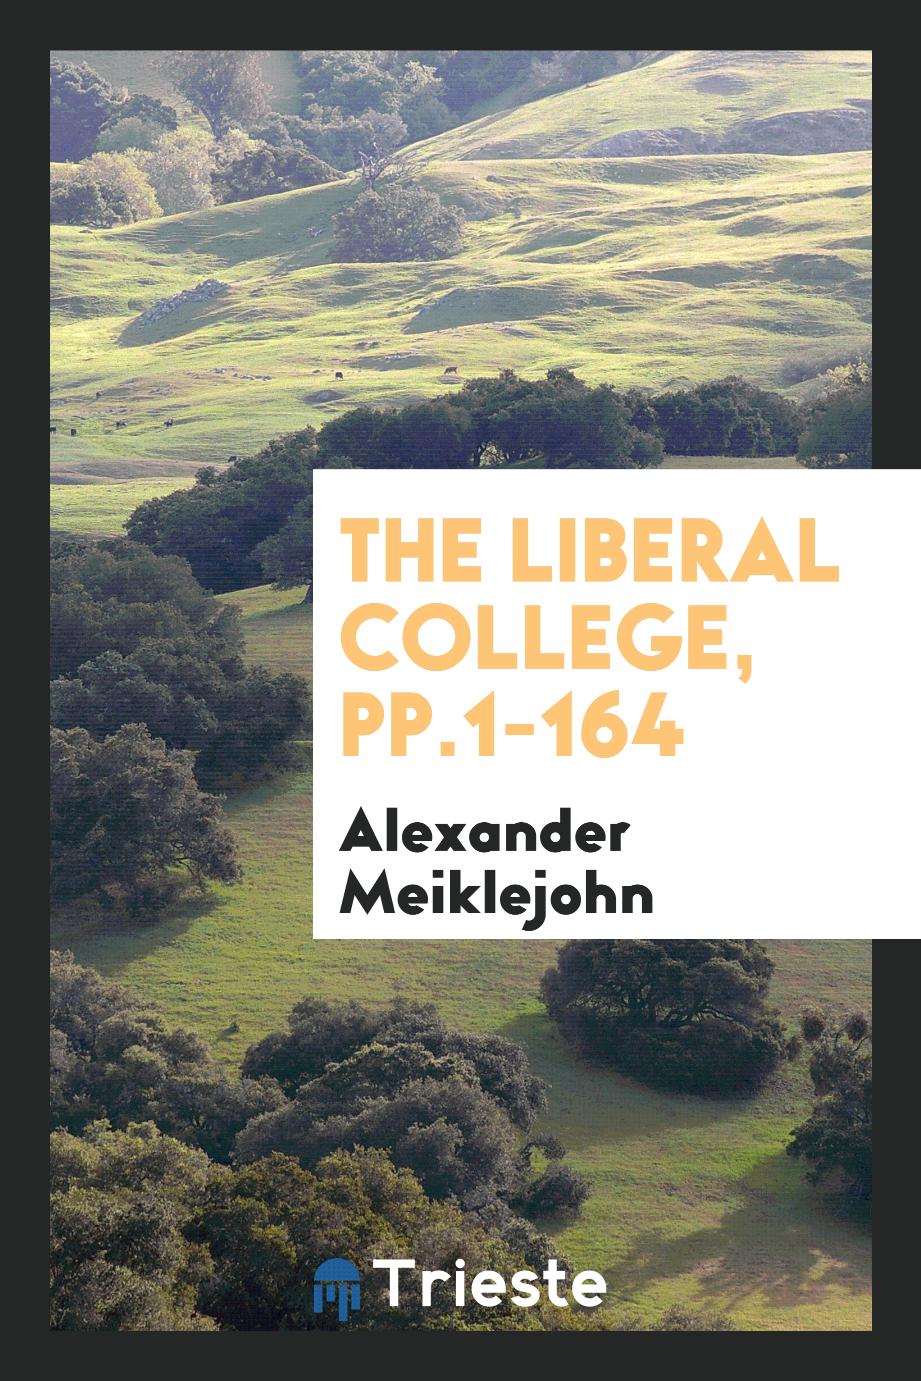 The Liberal College, pp.1-164